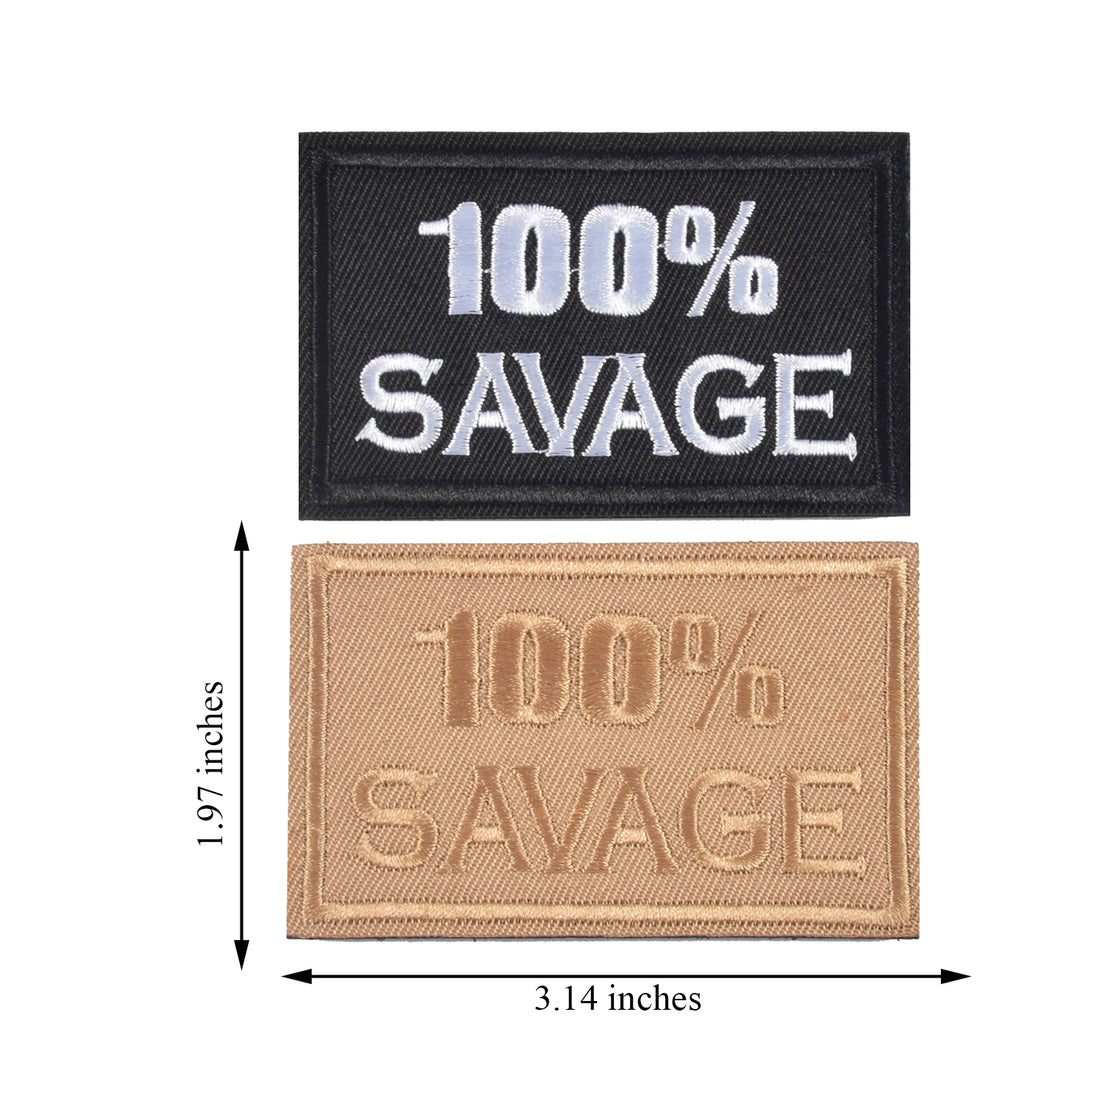 2 Pieces 100% SAVAGE Military Tactical Patches, Backpack Armband Embroidery Decorative Patch